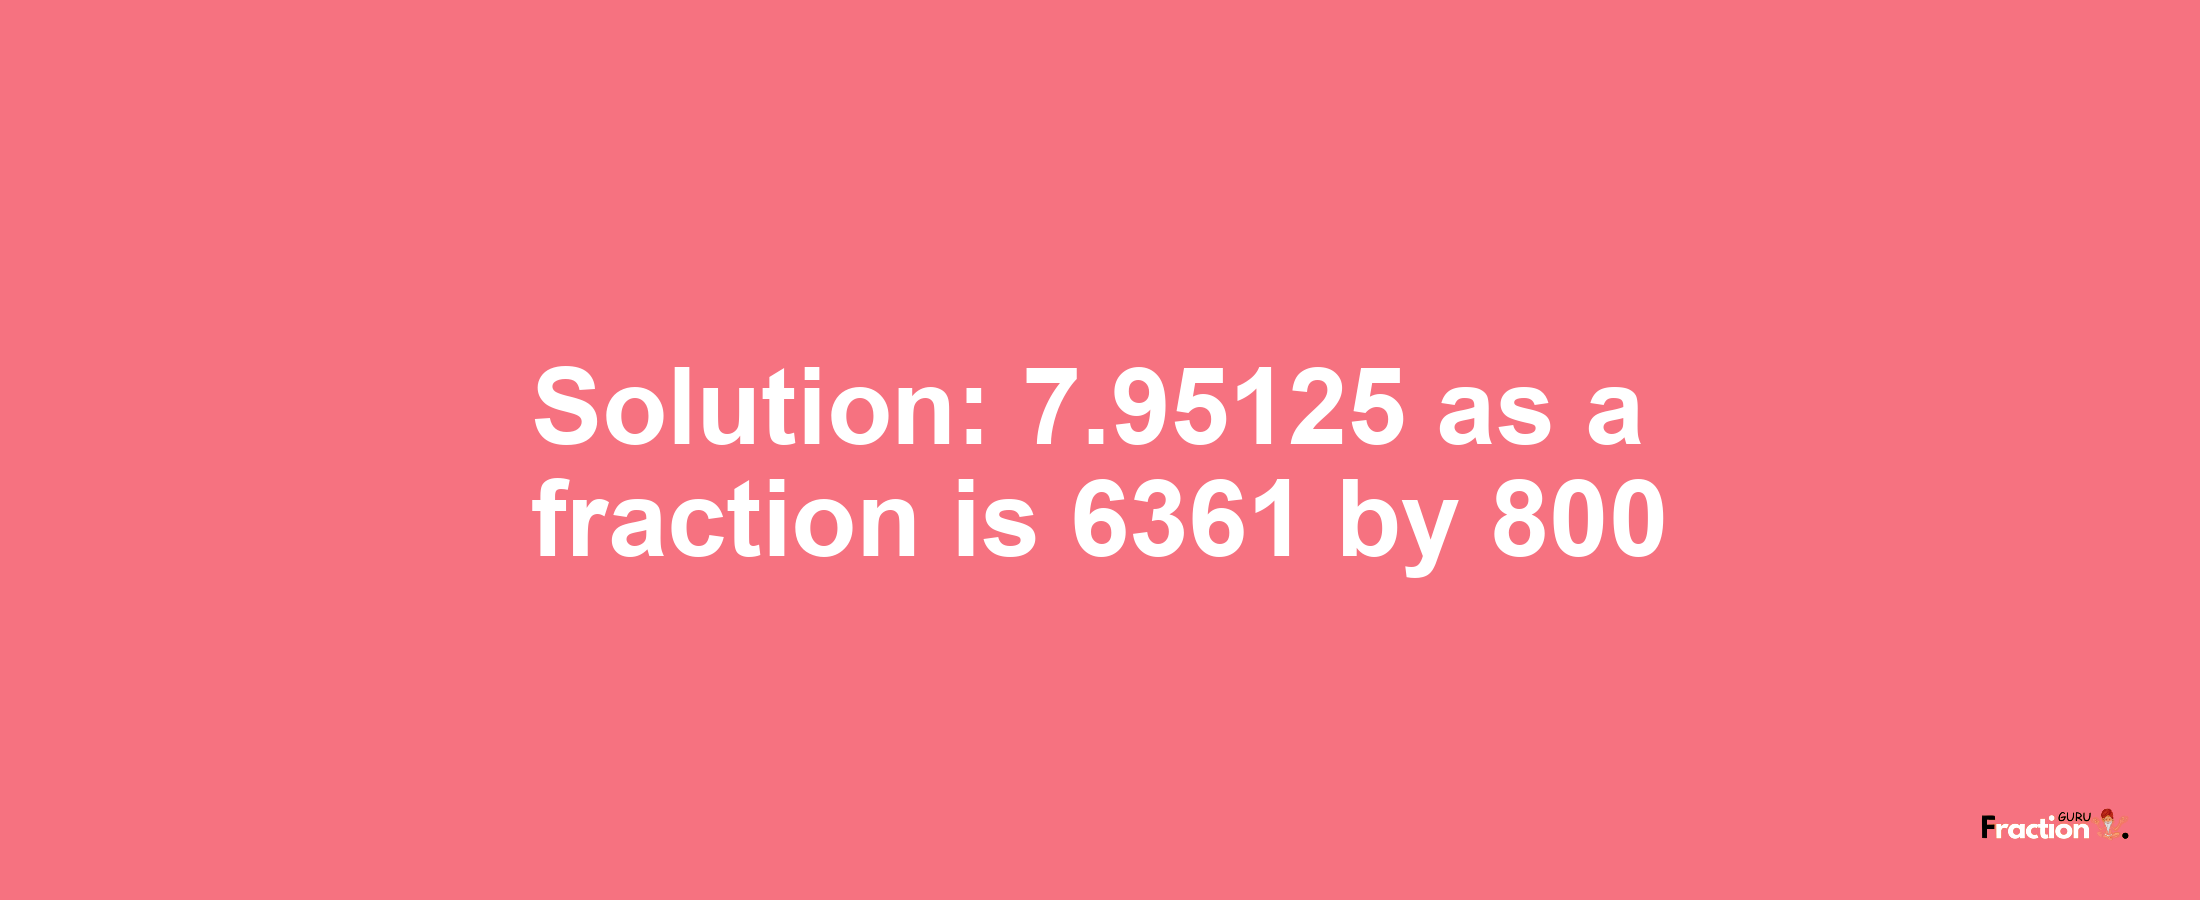 Solution:7.95125 as a fraction is 6361/800